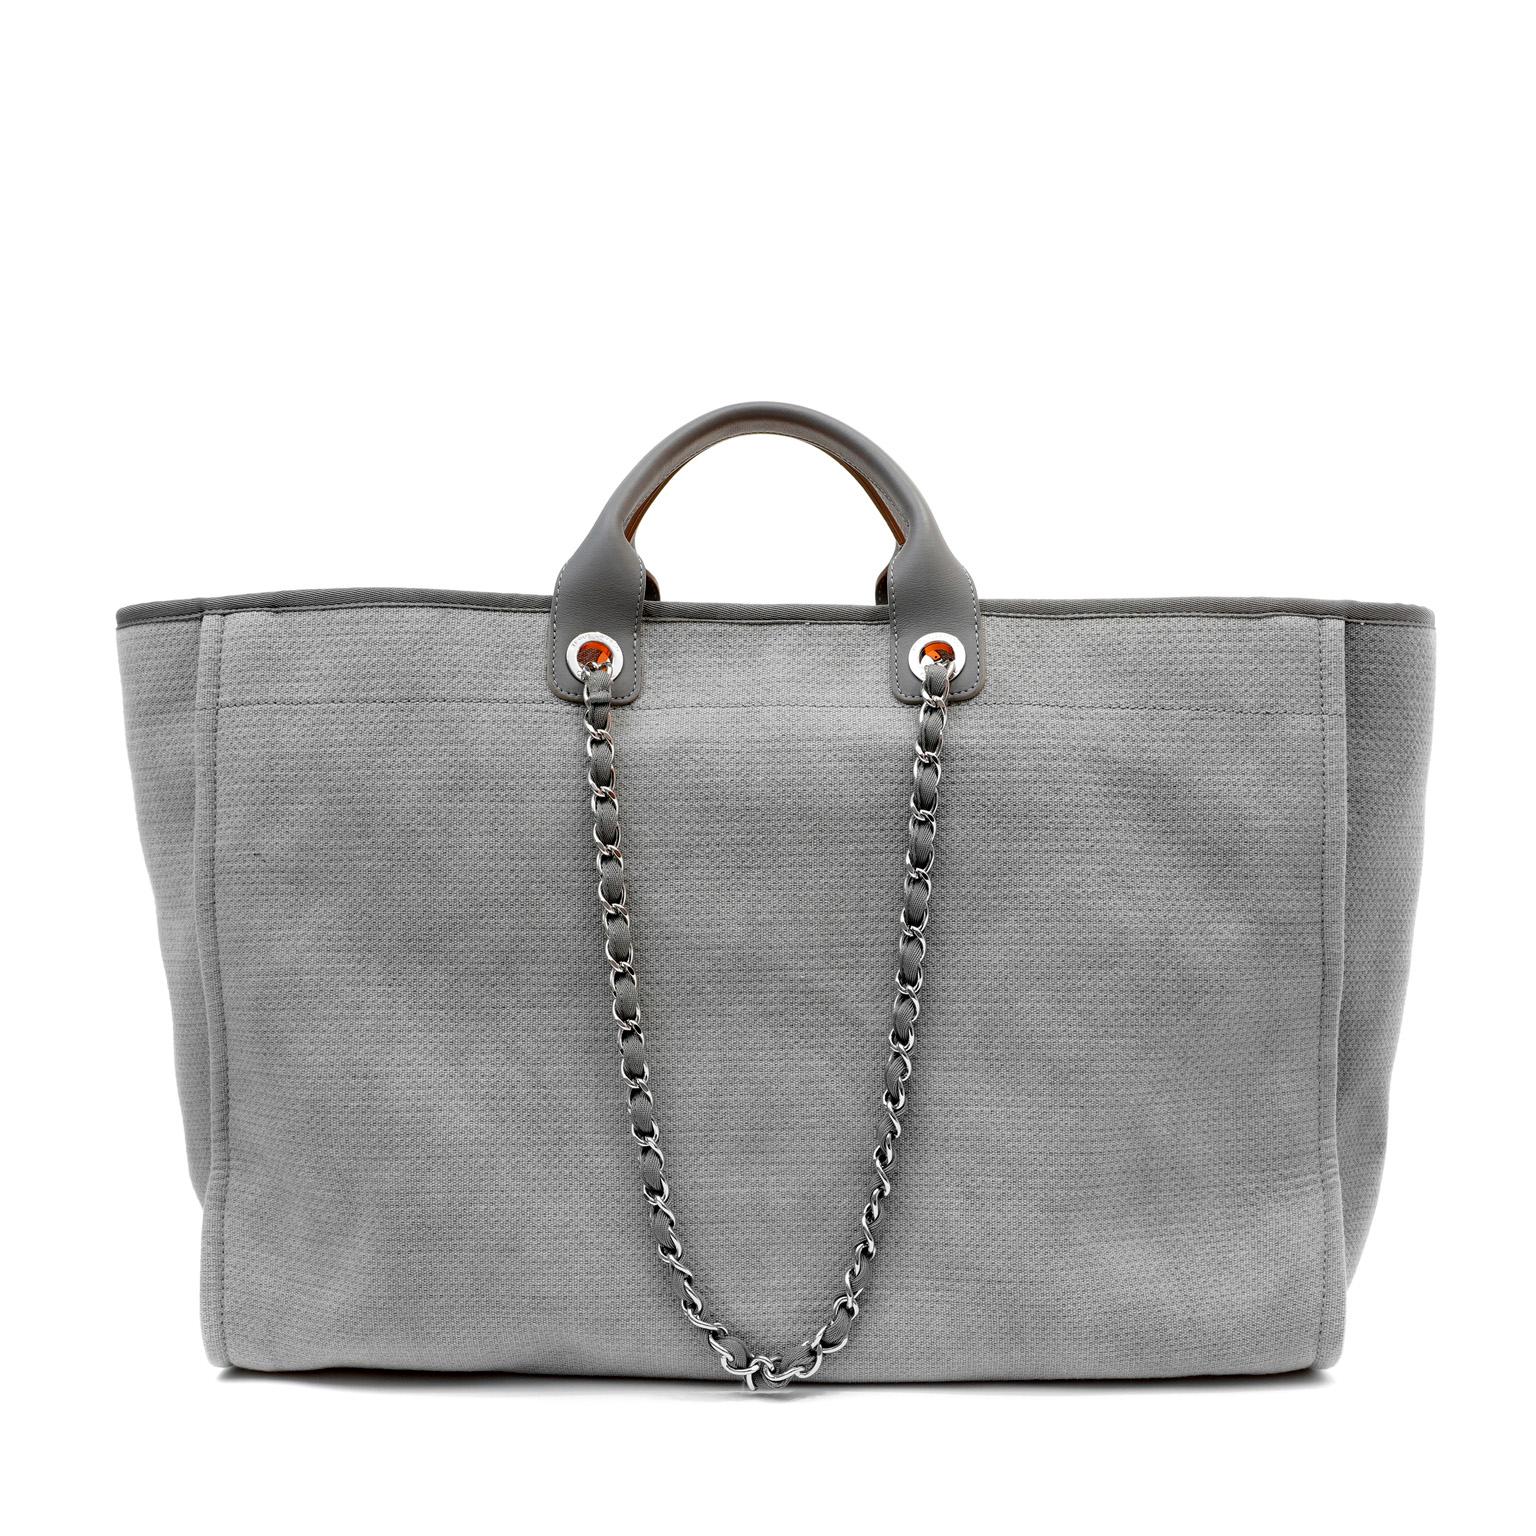 This authentic Chanel Grey XXL Deauville Tote is in pristine condition.  The iconic Chanel design is perfect for resort wear and travel.
Dark grey fabric tote is extra large and roomy.  Silver stitching and hardware.  Carried by the leather top